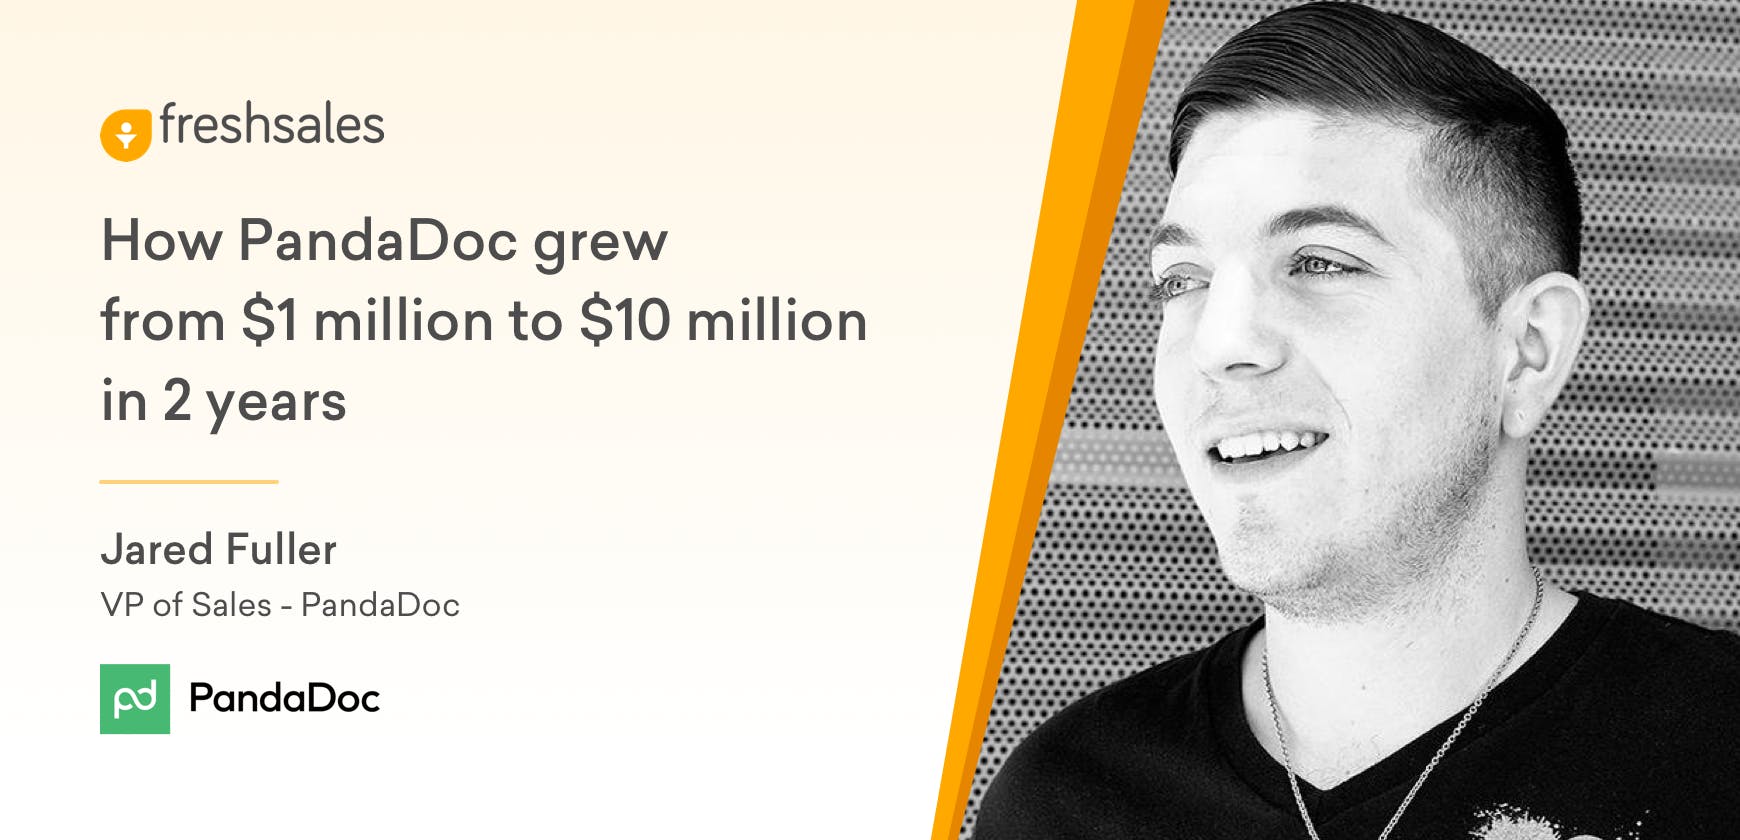 featured image - How PandaDoc grew from $1 million to $10 million in 2 years